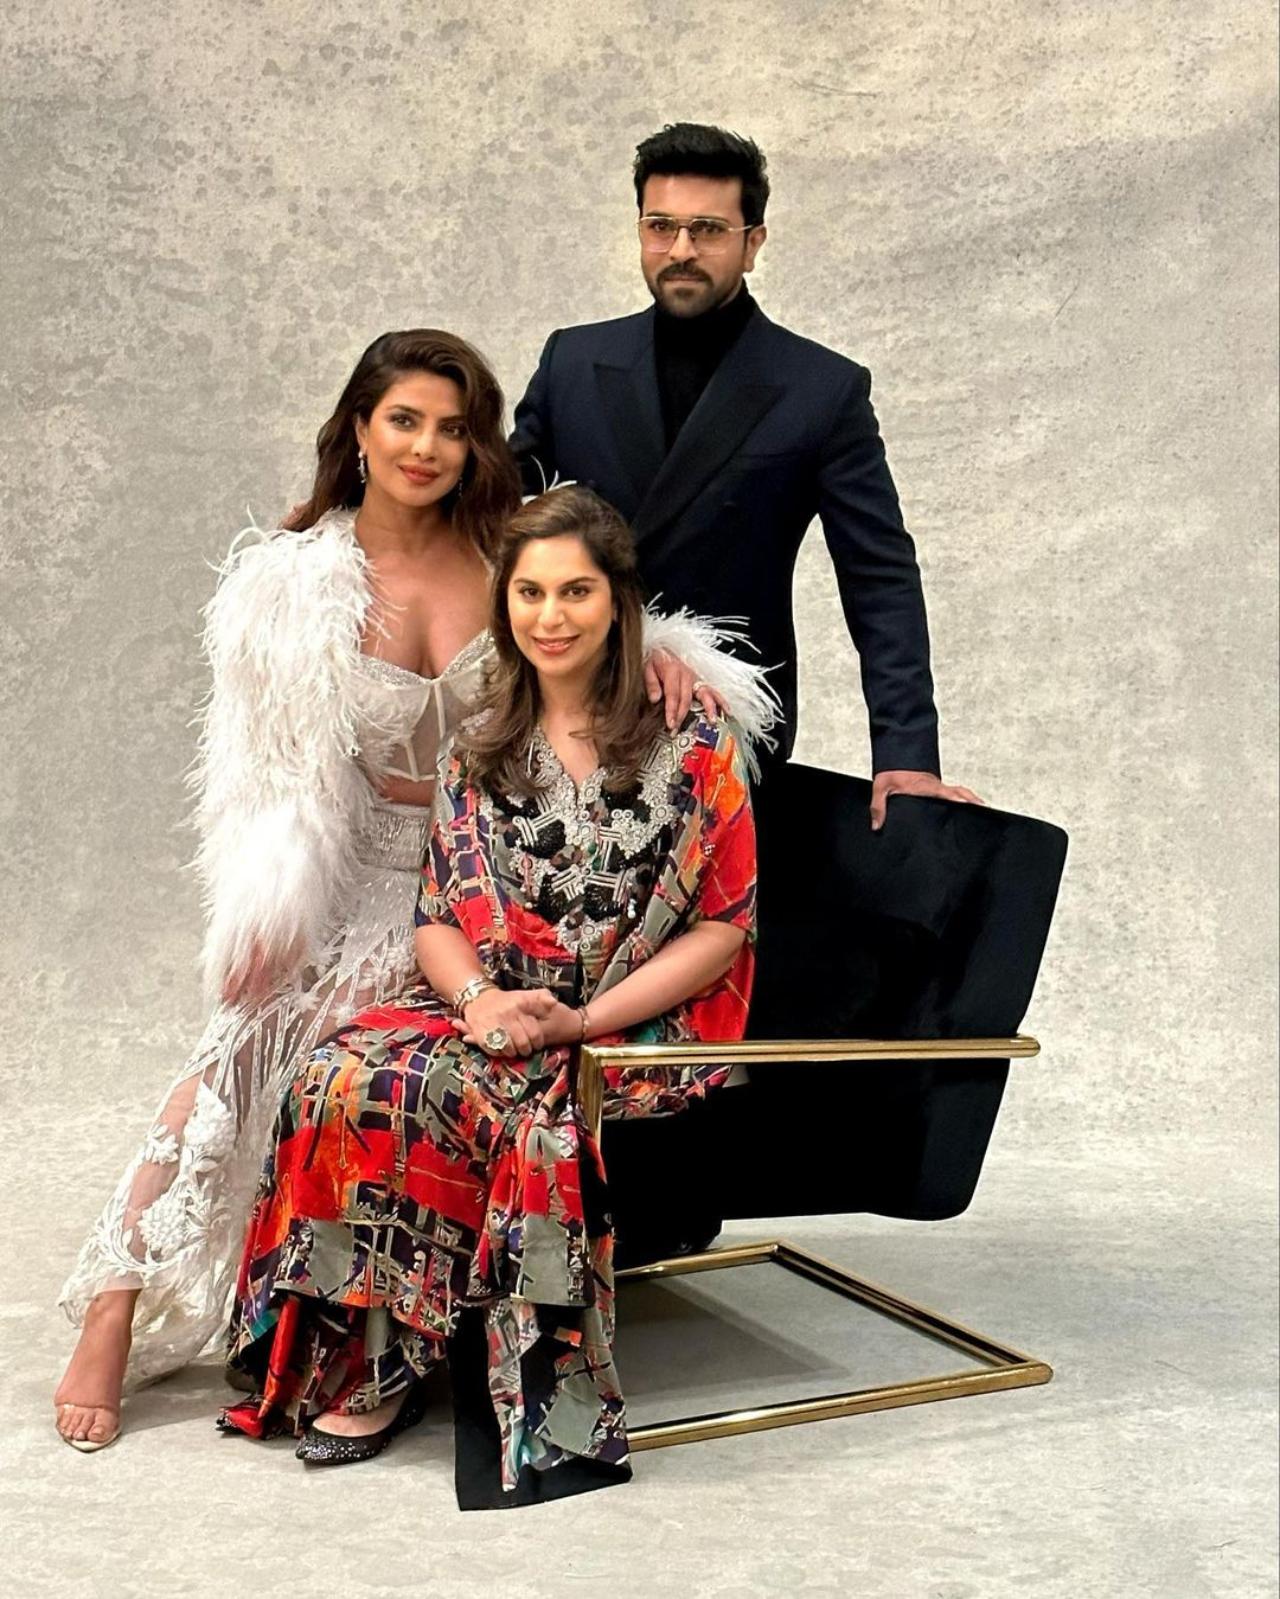 Ram Charan and his wife Upasana were also at the bash. Ram has been extensively promoting his film 'RRR' in the United States of America ahead of the Oscars. Recently, the film bagged multiple awards at the Hollywood Critics Association Awards